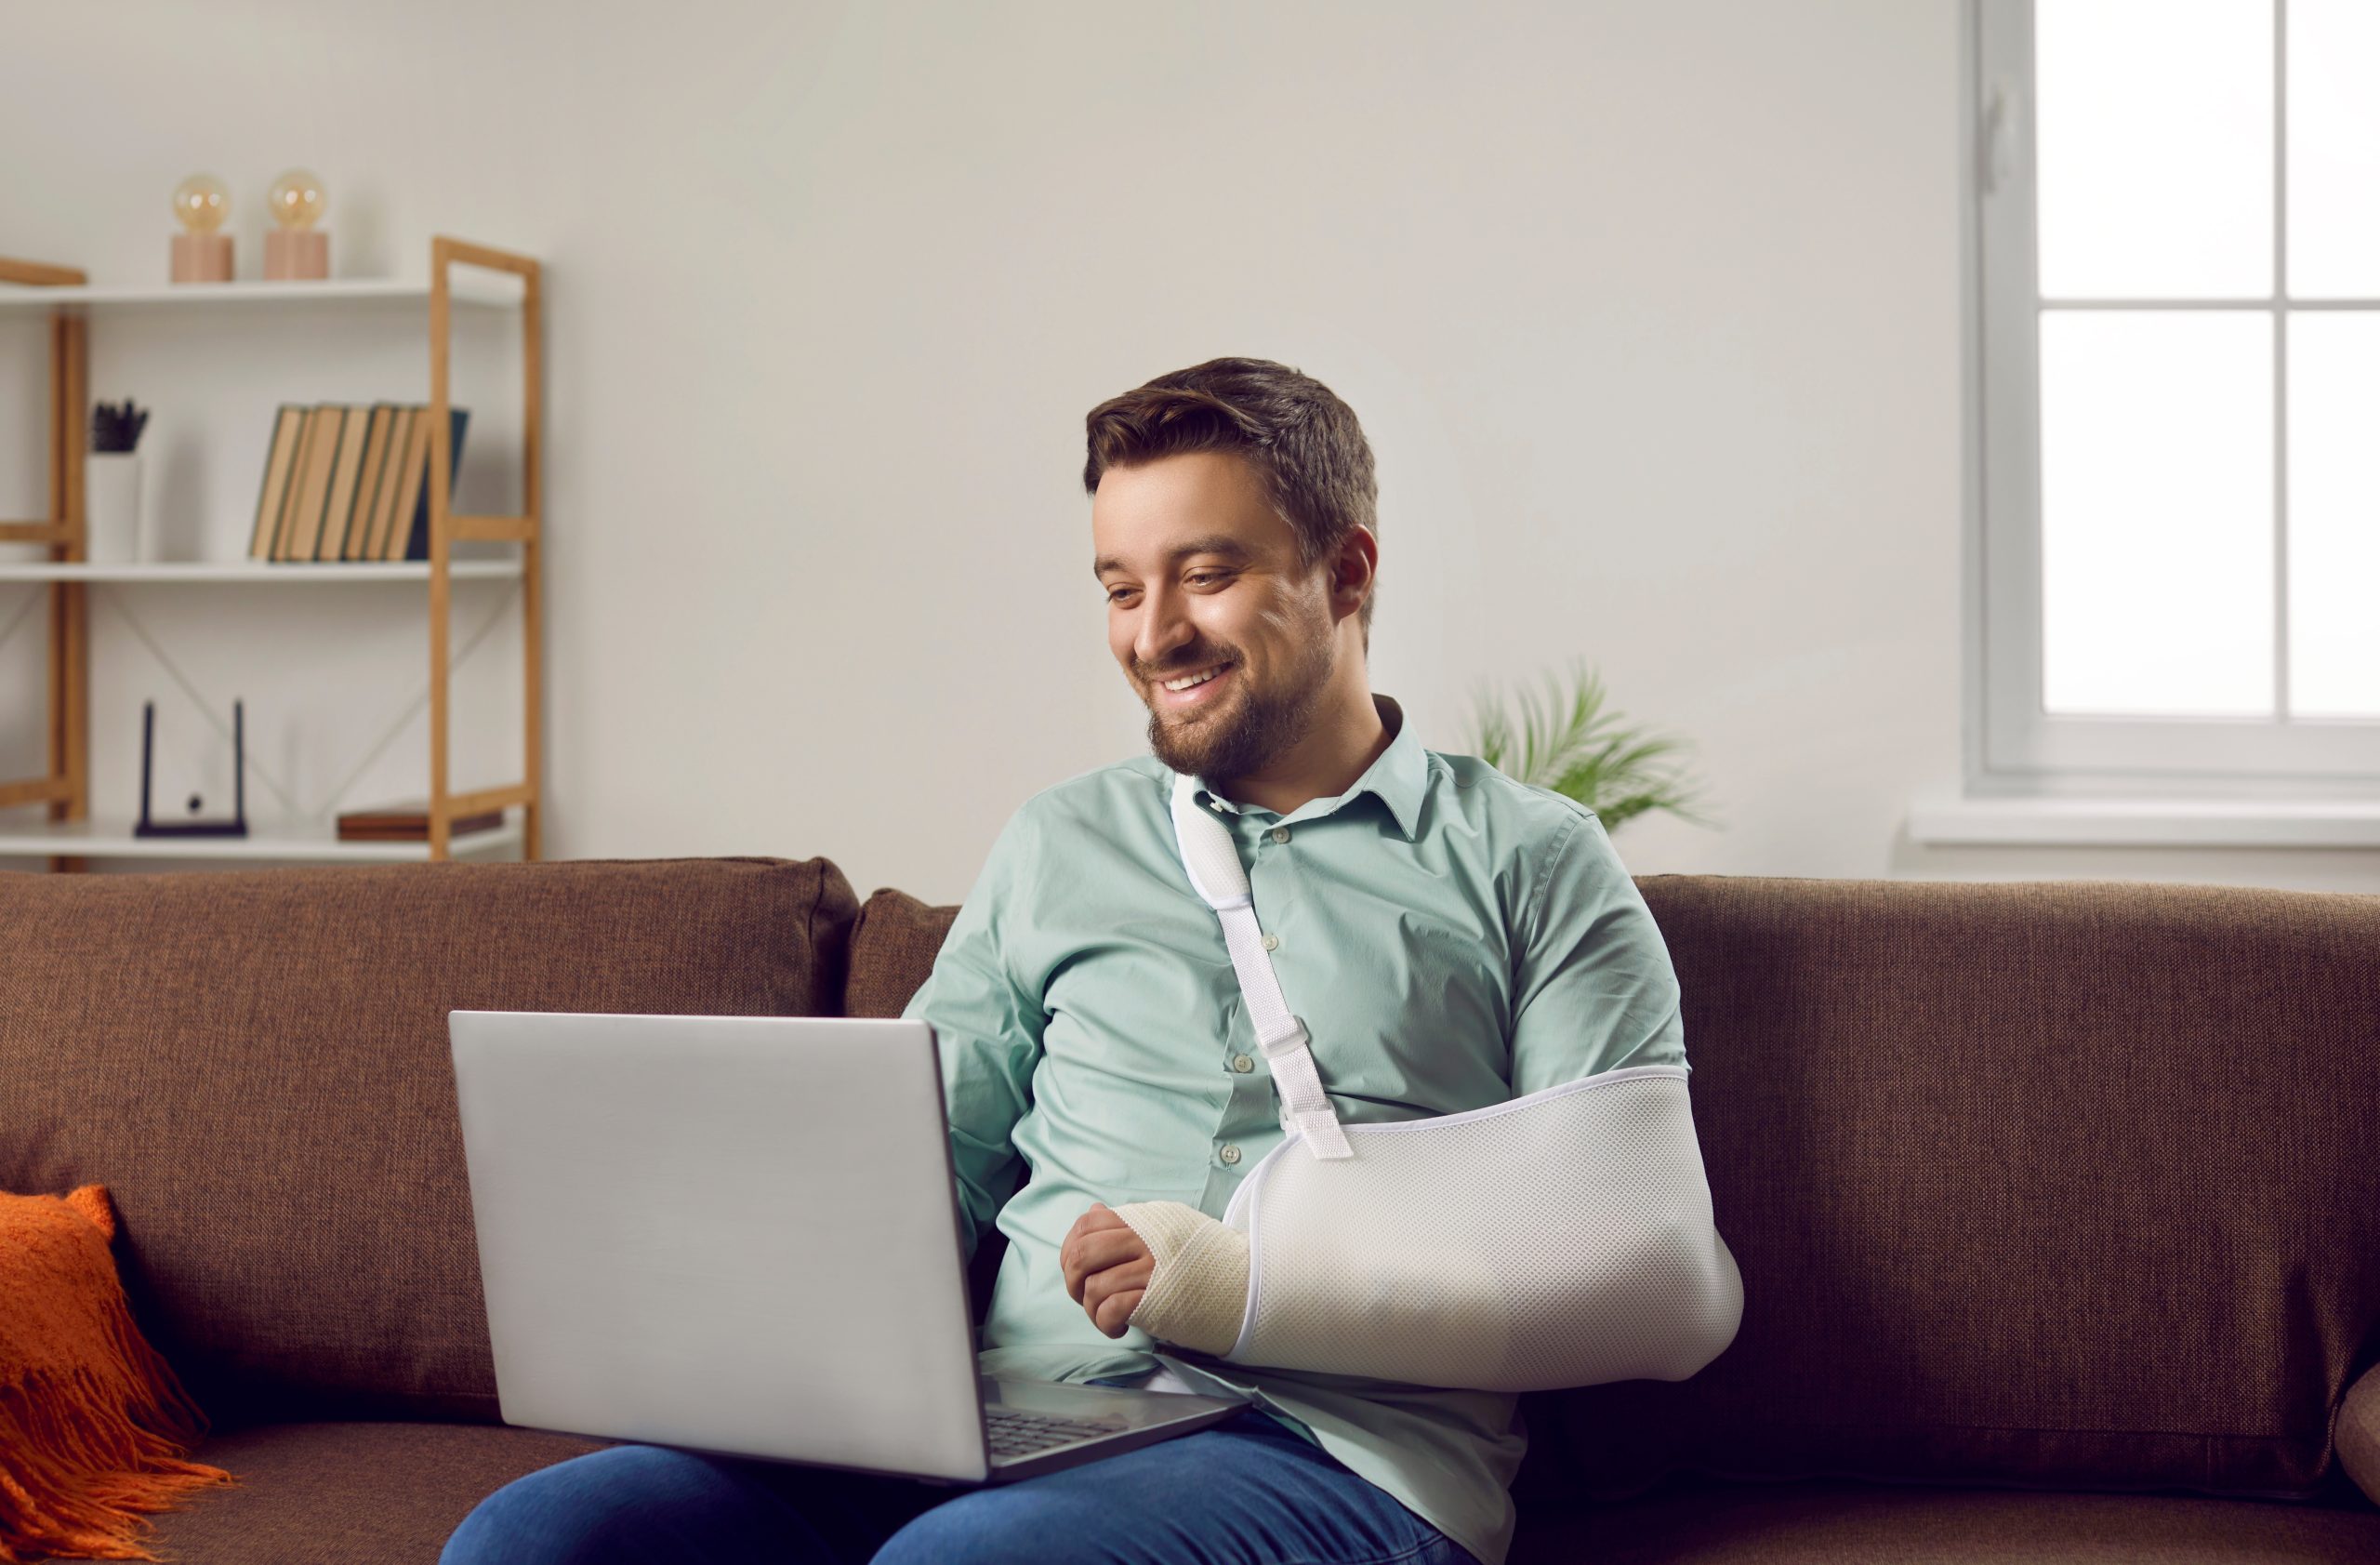 Man sitting on sofa on laptop with arm in sling